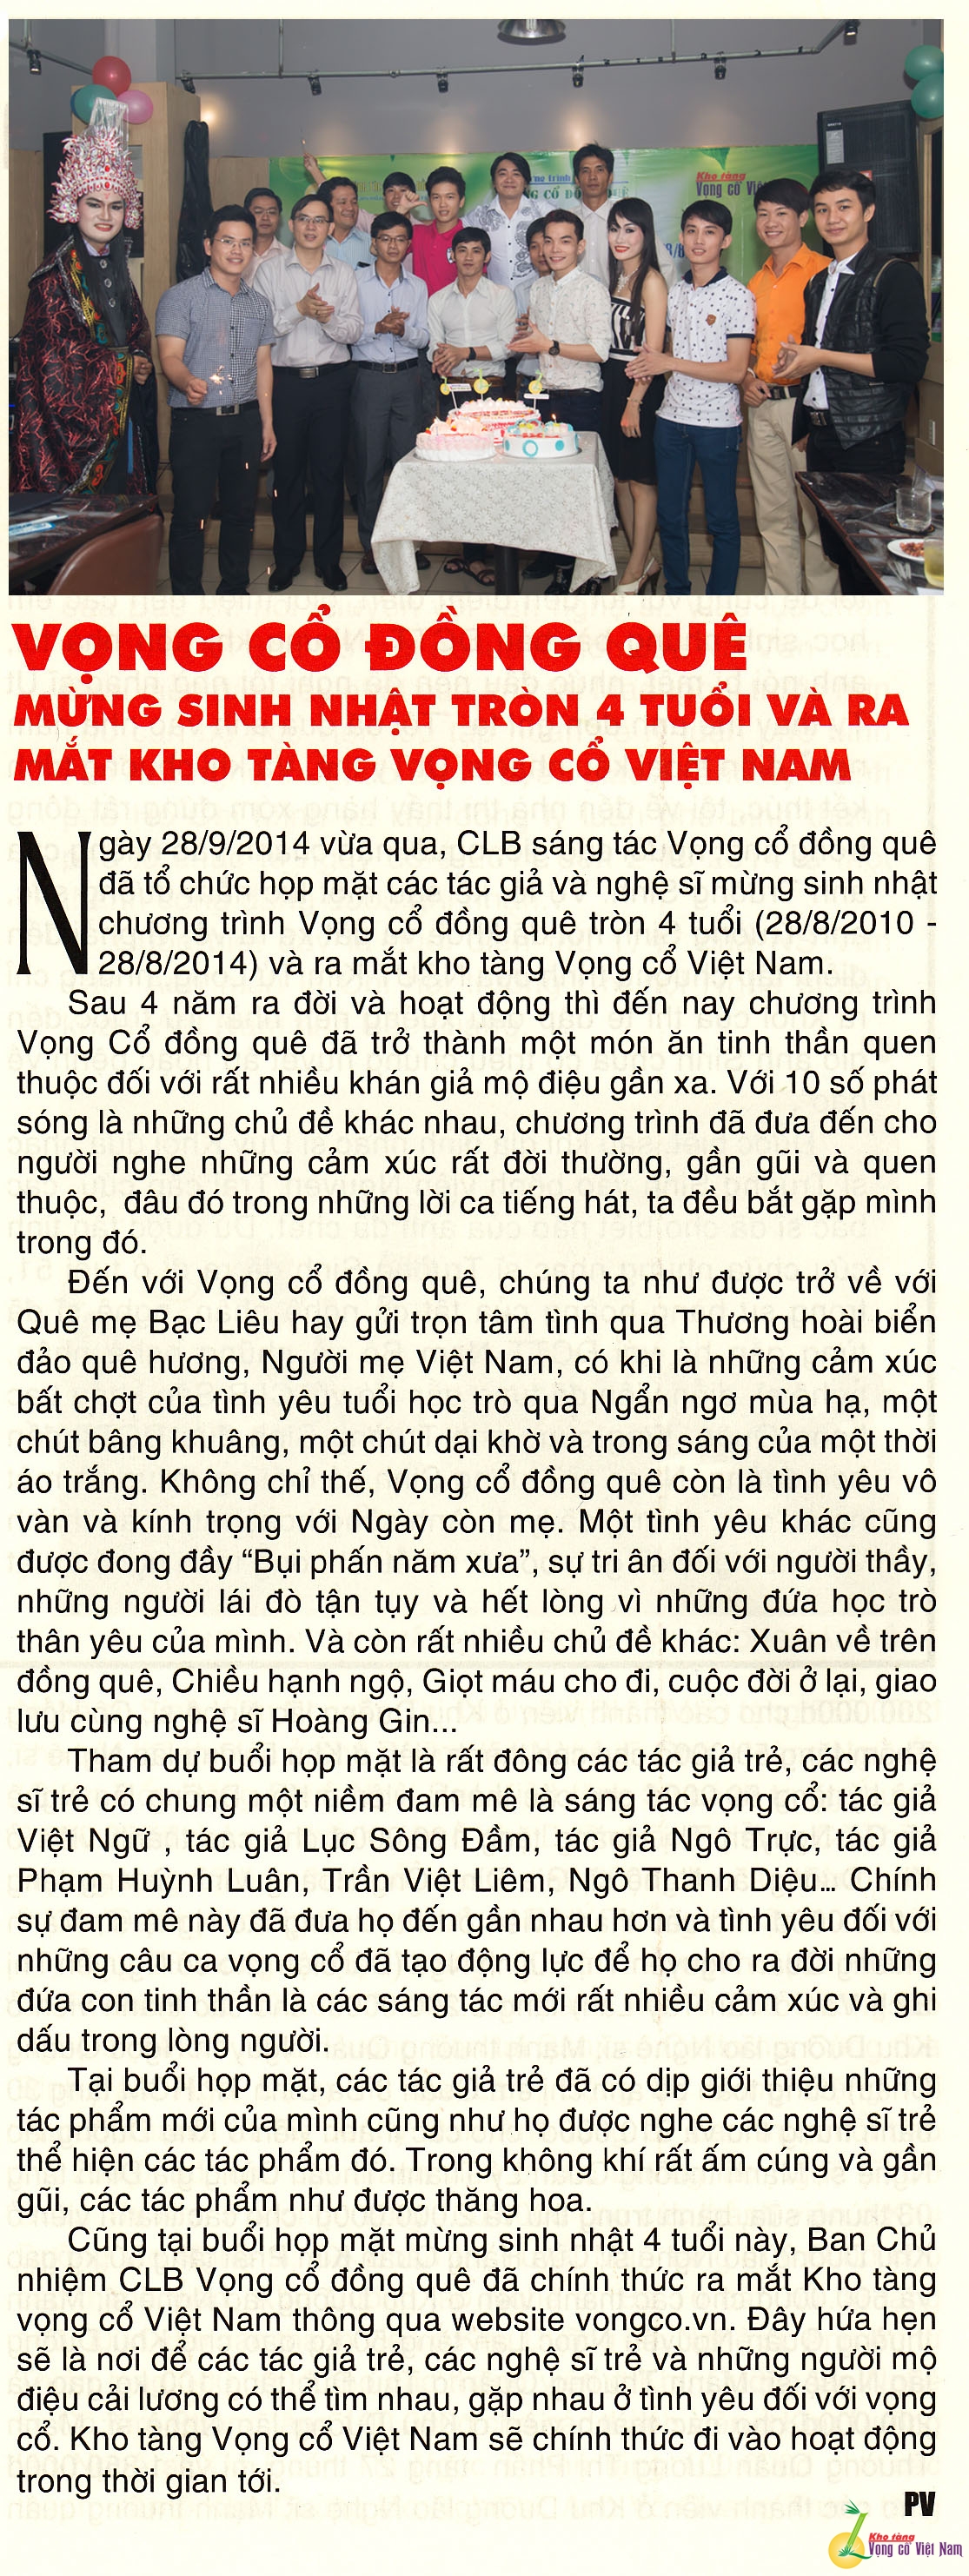 clb vong co dong que 0002 copy12